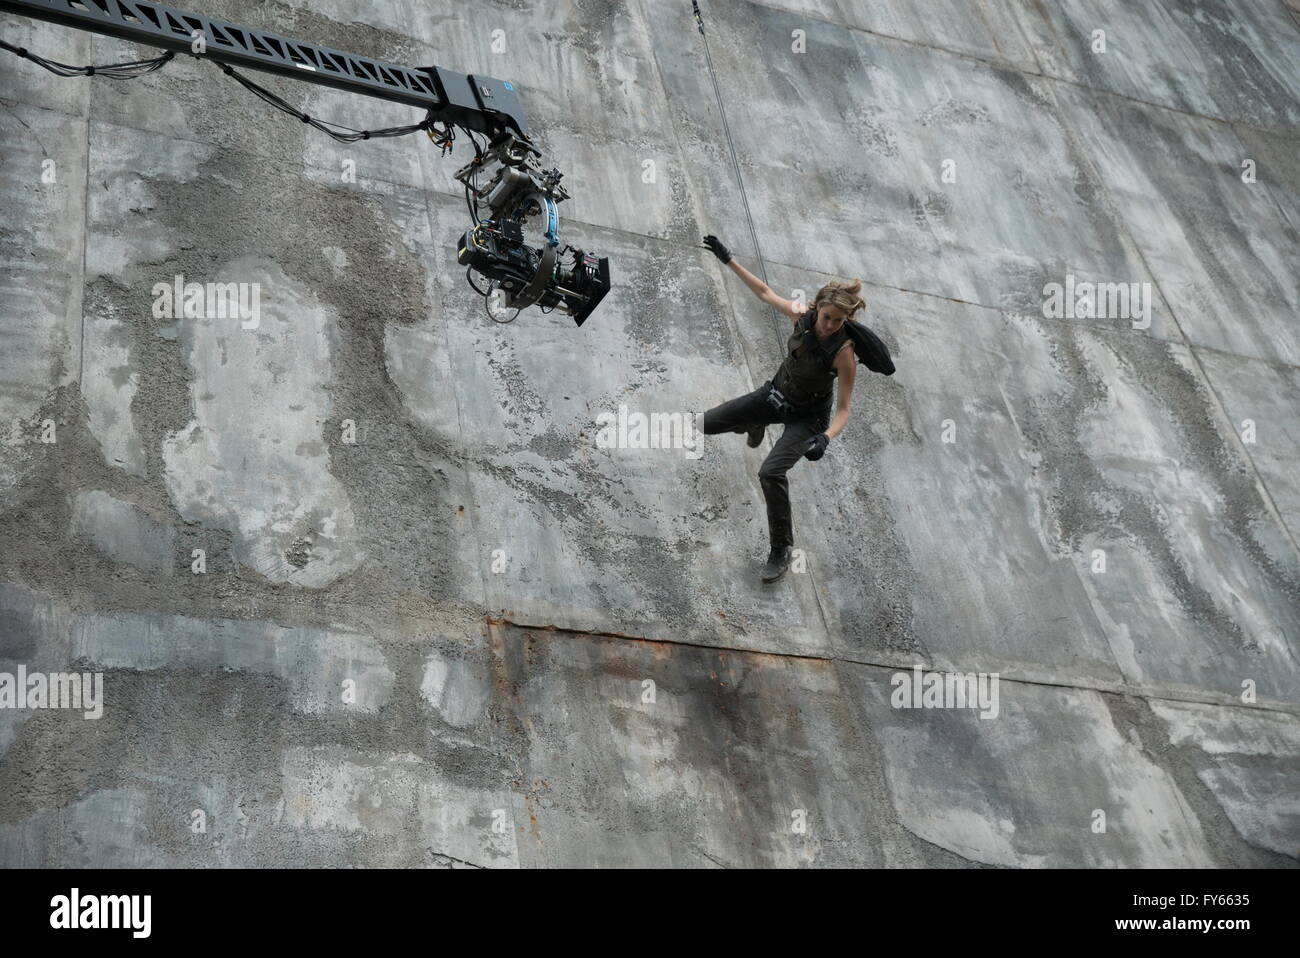 RELEASE DATE: March 18, 2016 TITLE: Divergent Series - Allegiant STUDIO: Lionsgate DIRECTOR: Robert Schwentke PLOT: After the earth-shattering revelations of Insurgent, Tris must escape with Four beyond the wall that encircles Chicago, to finally discover the shocking truth of the world around them PICTURED: Shailene Woodley stunt (Credit Image: c Lionsgate/Entertainment Pictures/) Stock Photo